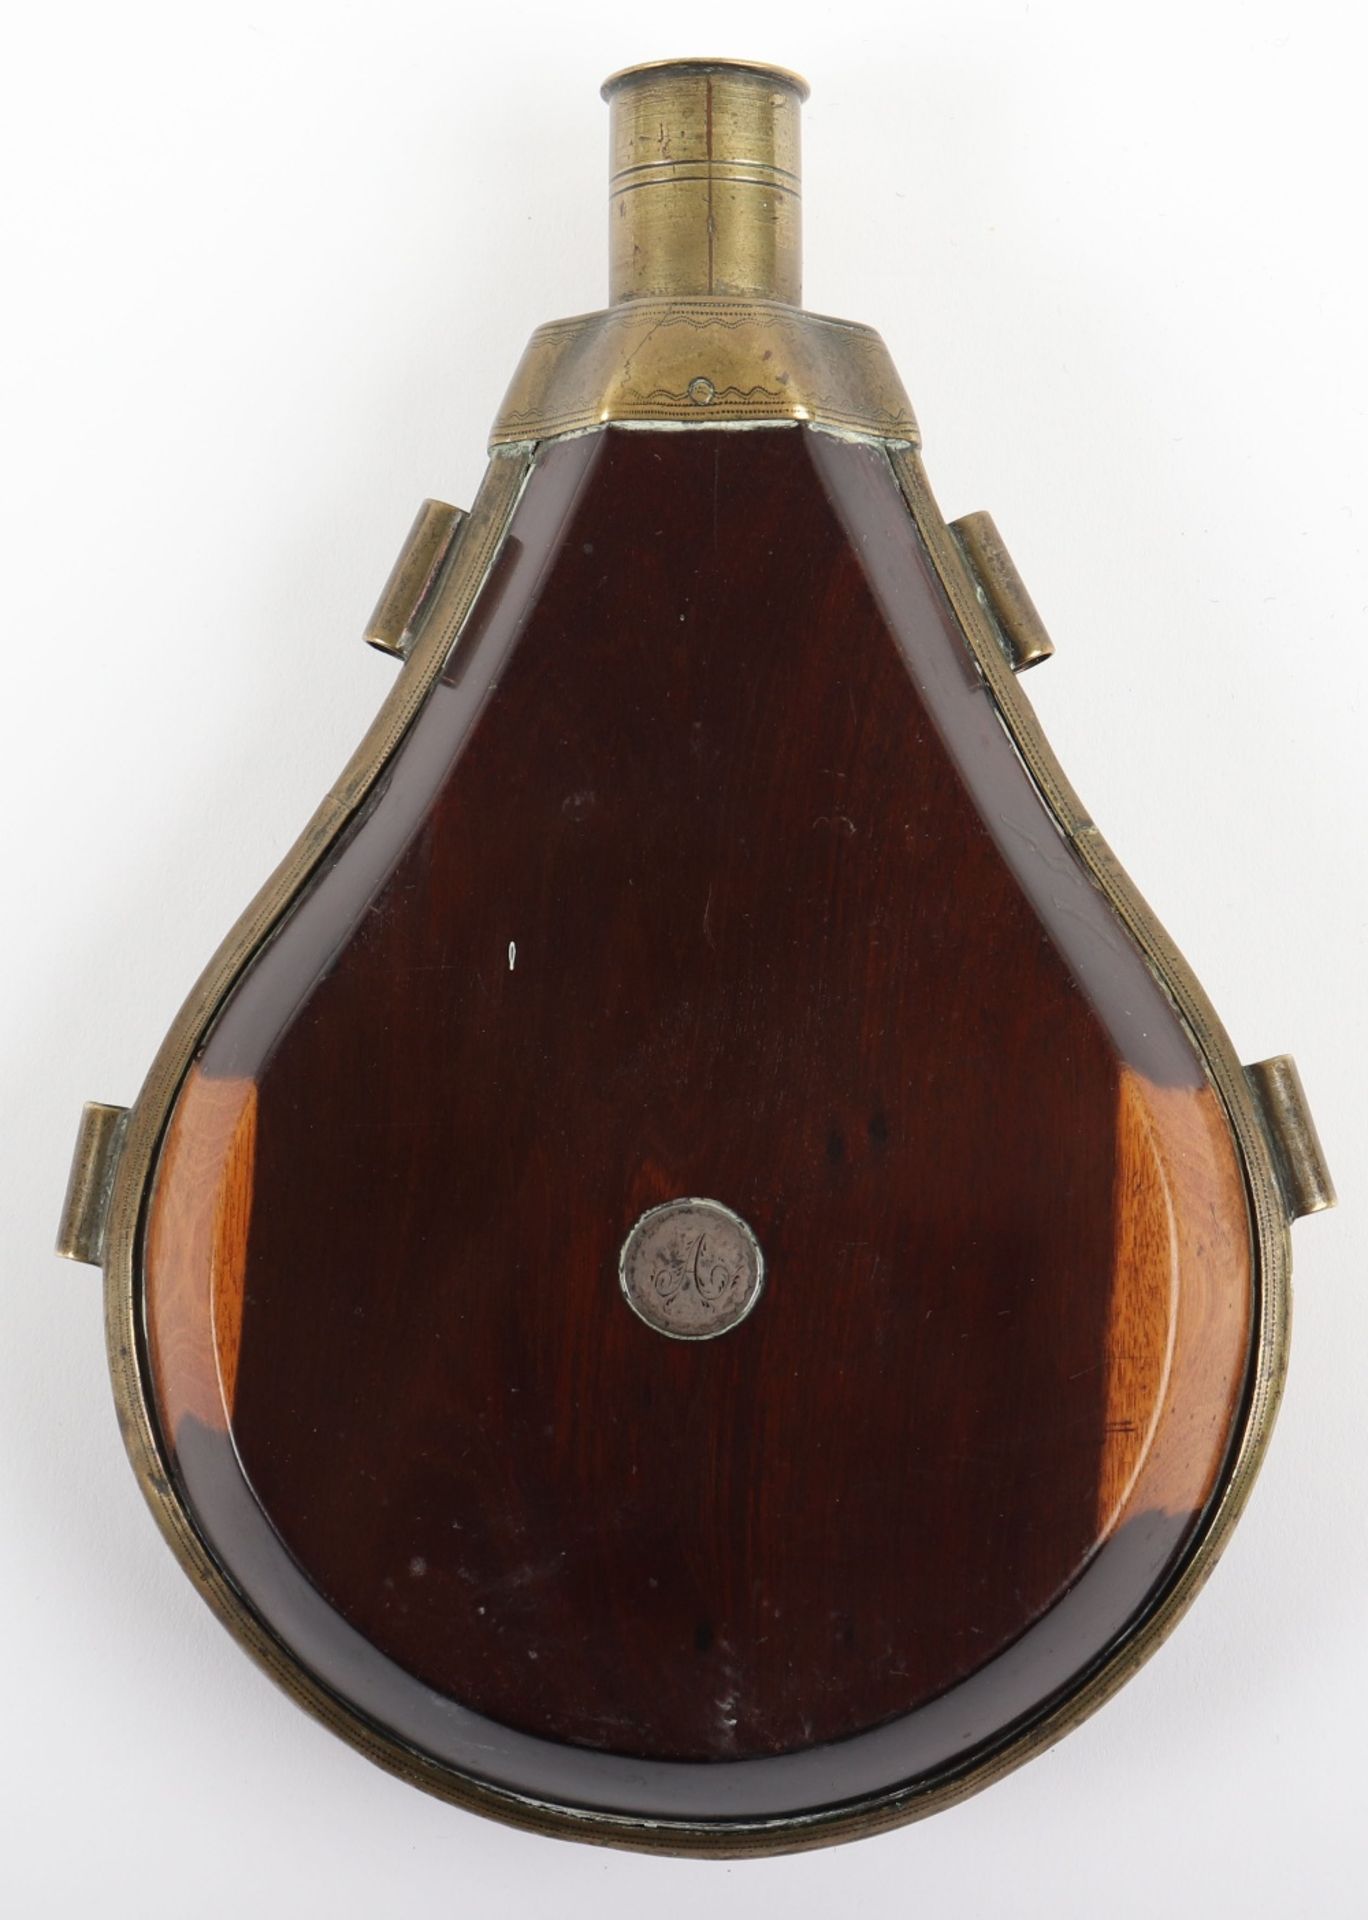 Fine and Unusual Anglo-Indian (or Franco-Indian?) Powder Flask of Indian Padauk Wood, Second Half of